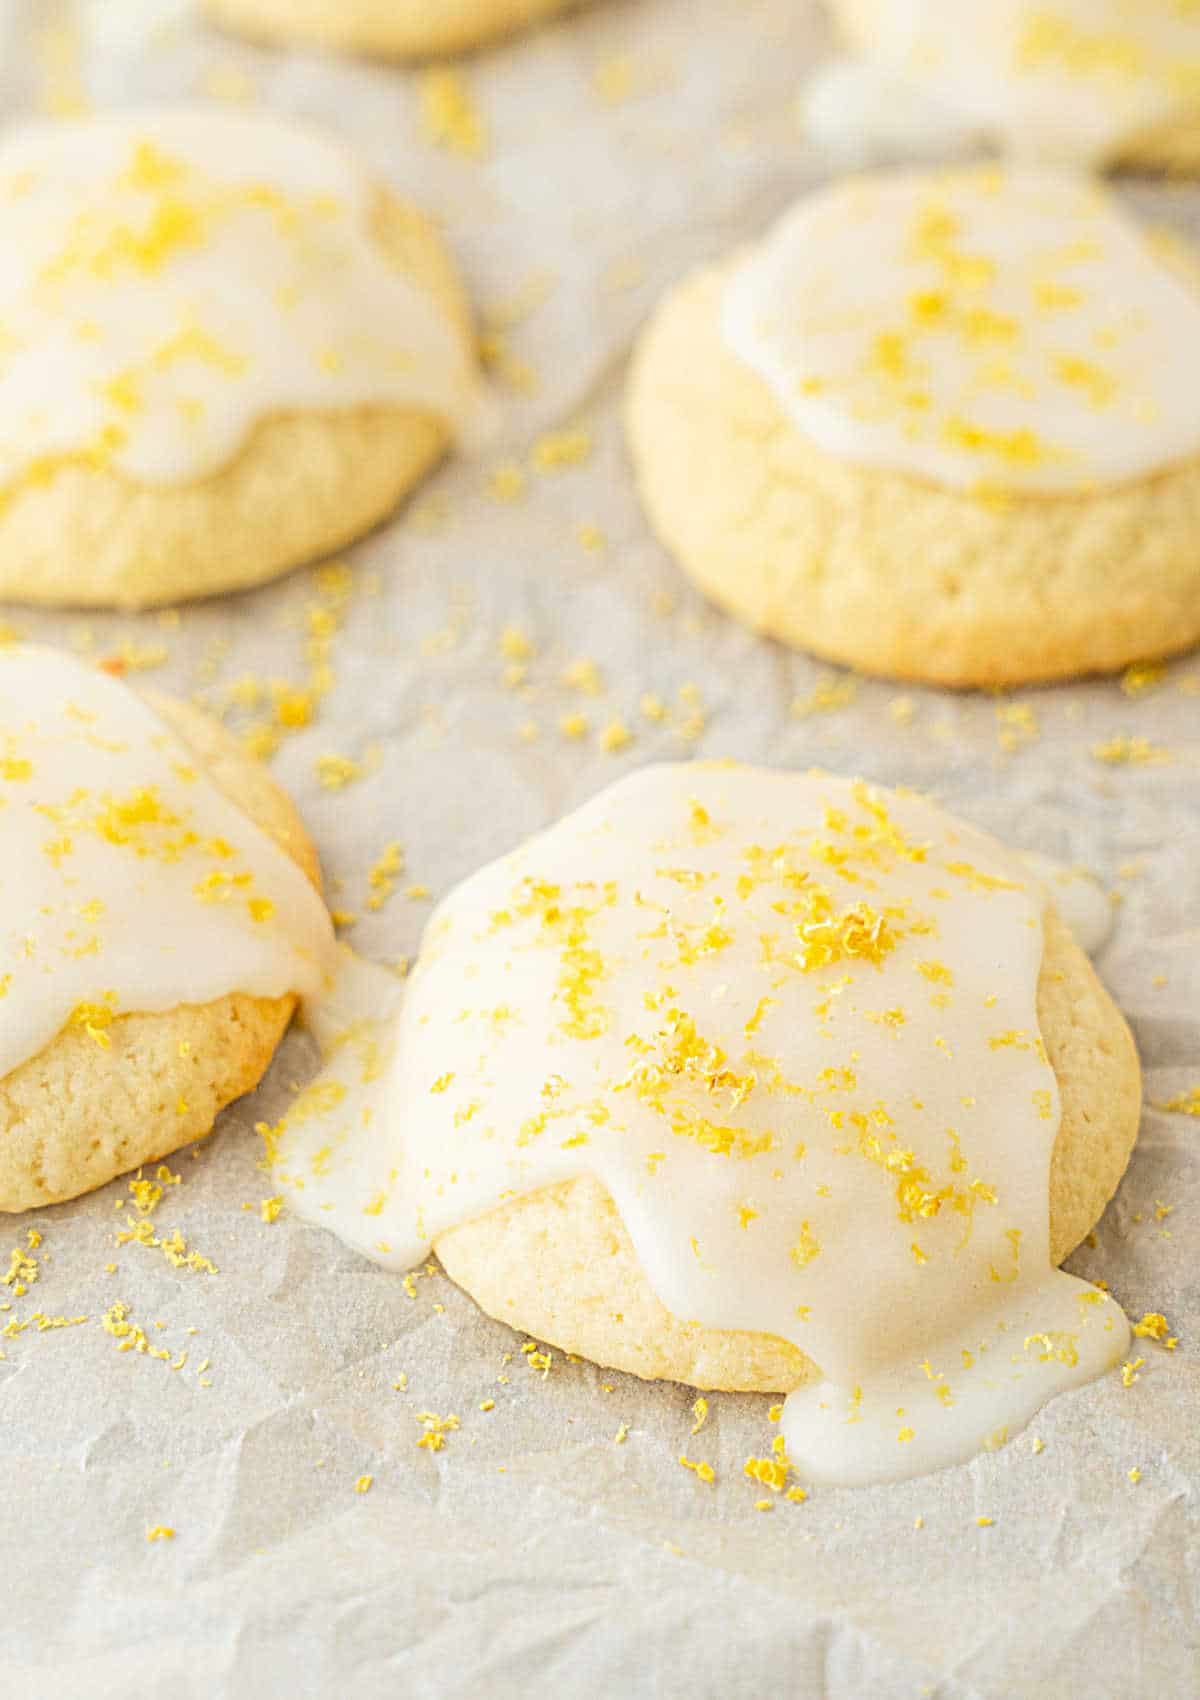 Softly glazed ricotta cookies with lemon zest on top. Gray surface.